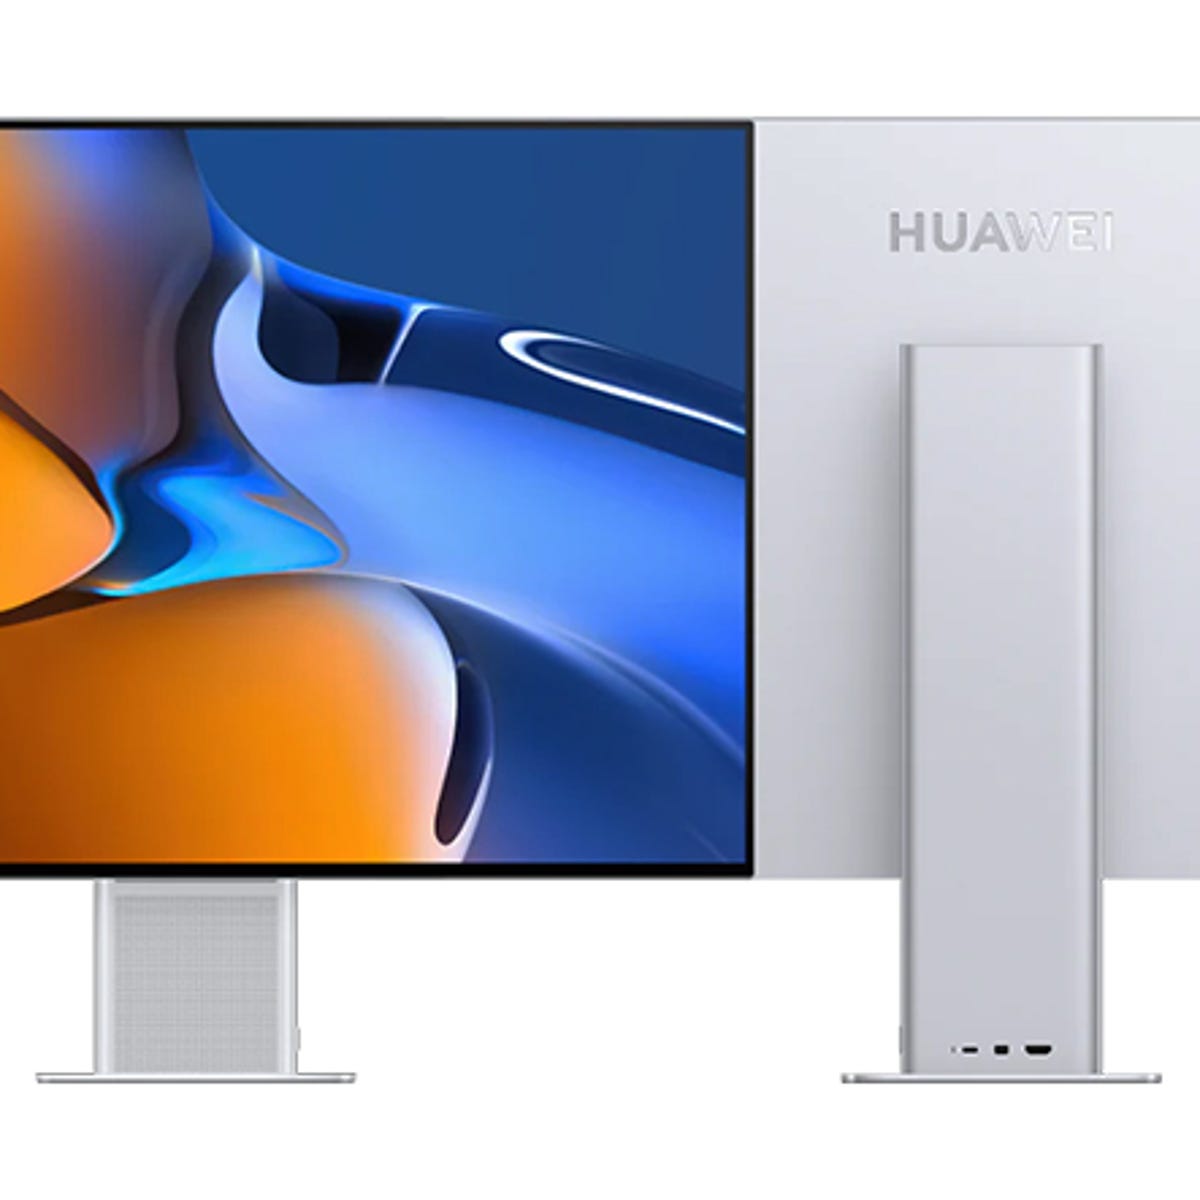 Huawei MateView review: An elegant and feature-rich 28-inch monitor